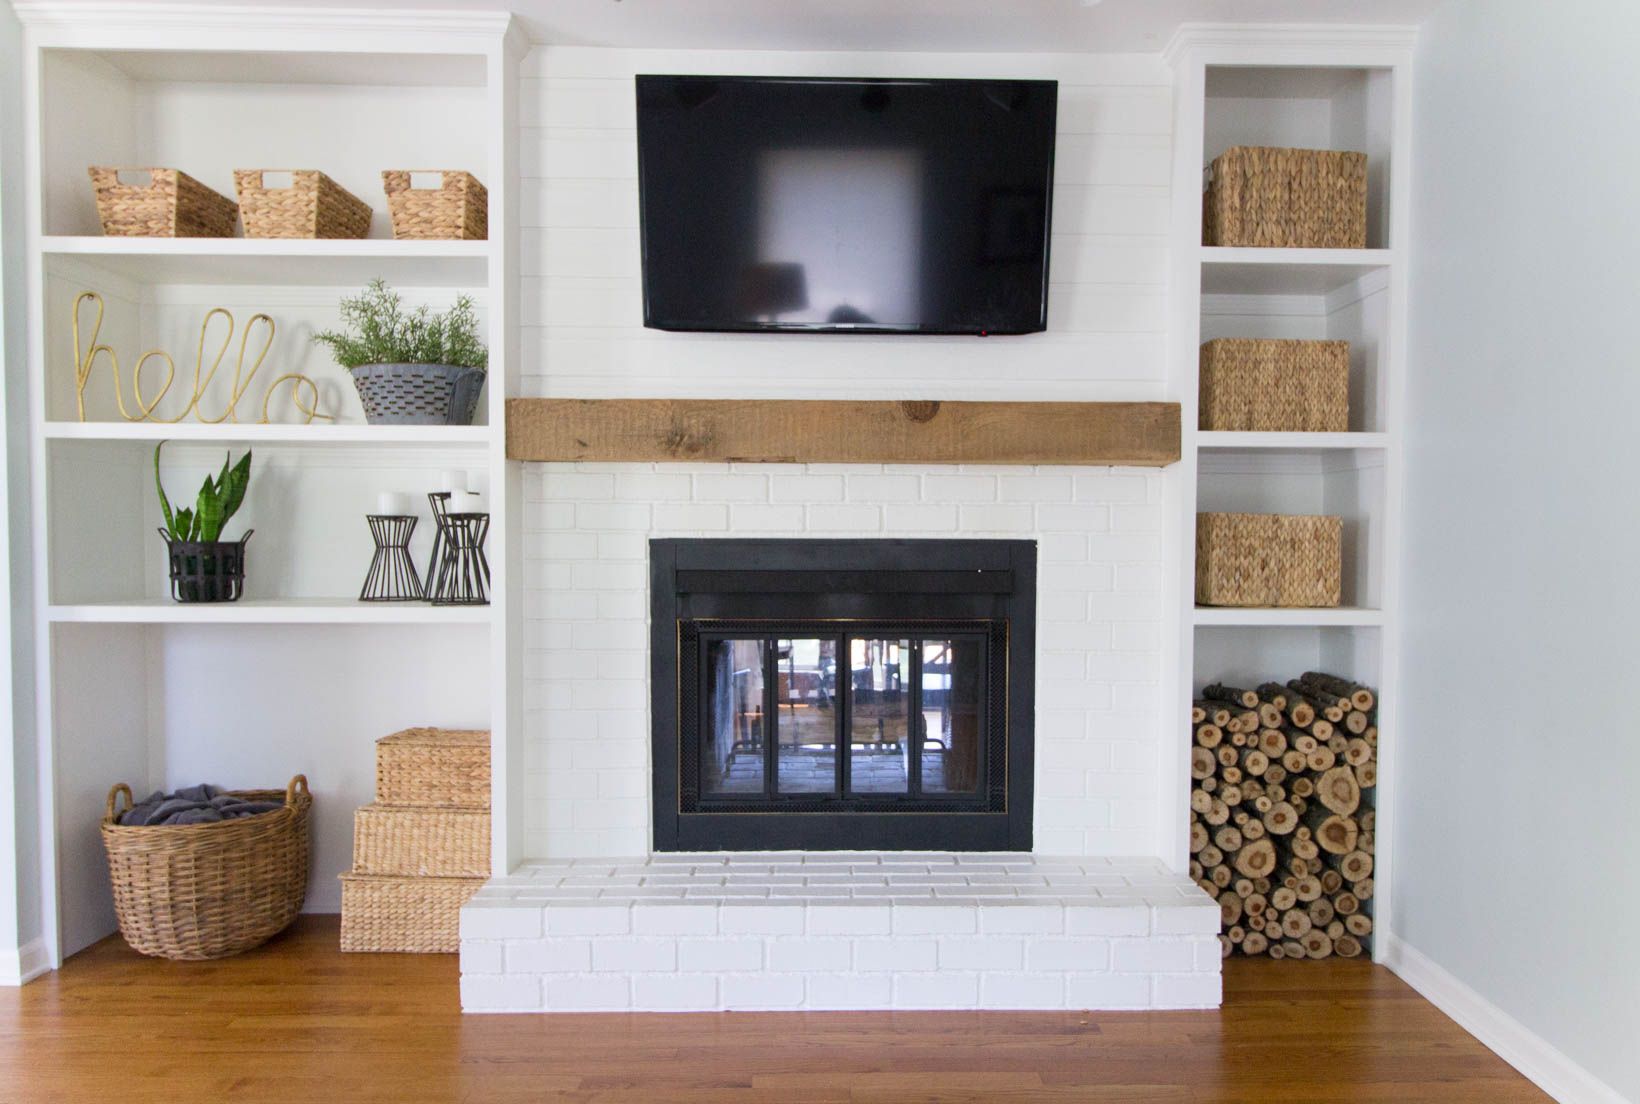 How to Build A Fireplace Mantel Shelf with Crown Molding Beautiful Built In Shelves Around Shallow Depth Brick Fireplace